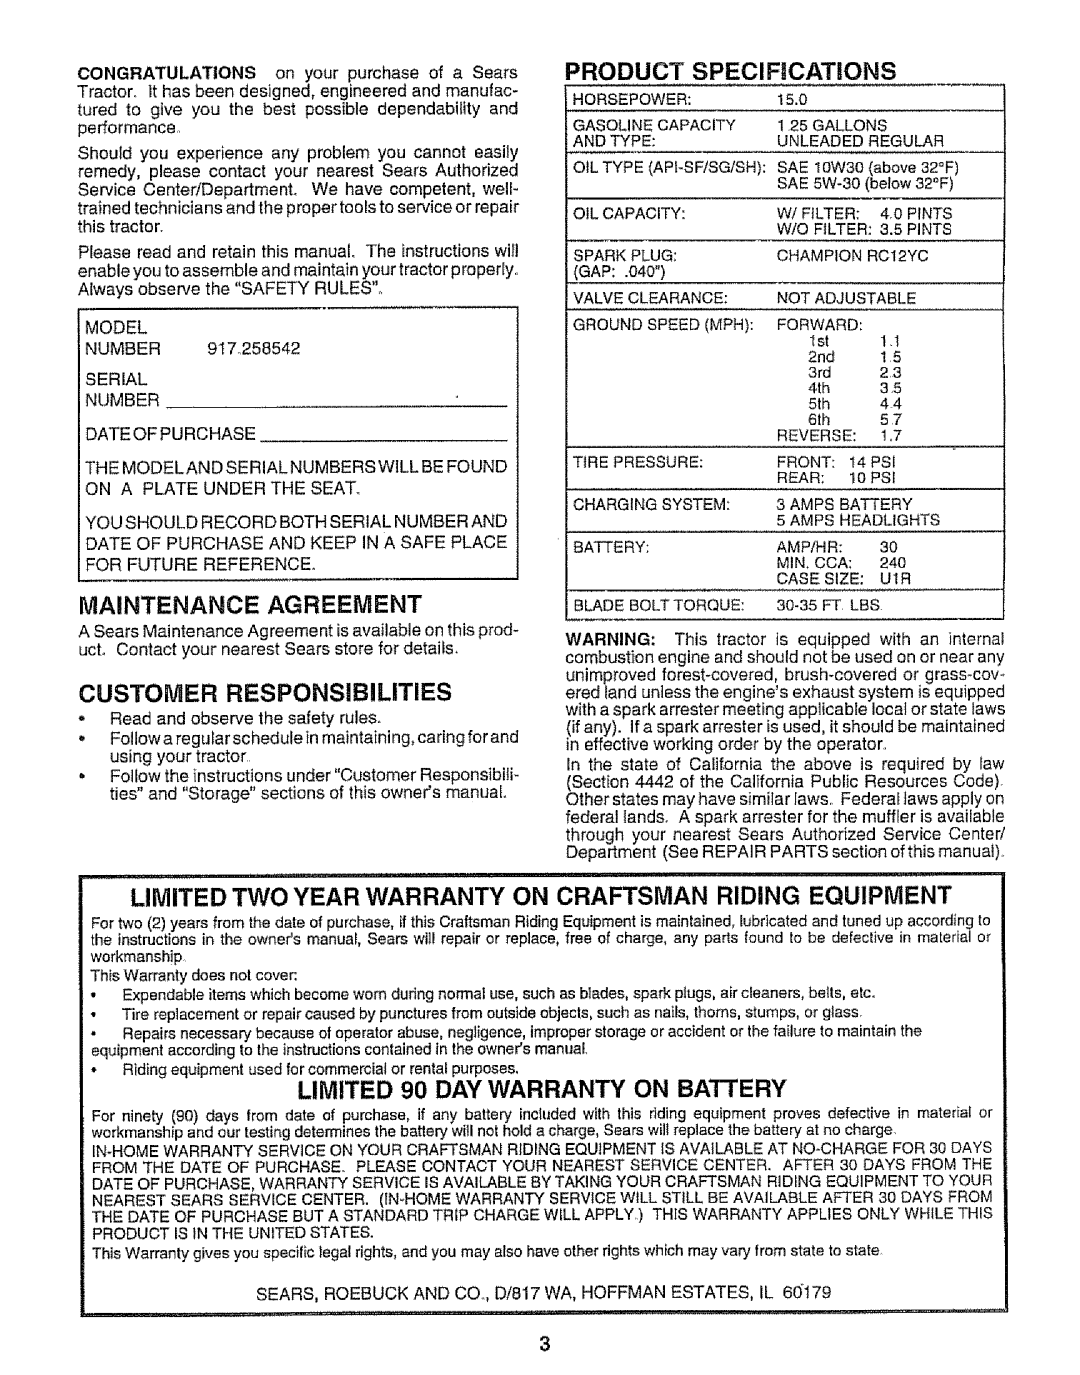 Sears 917.258542 owner manual Maintenance Agreement, Customer Responsibilities, Product Specifications 